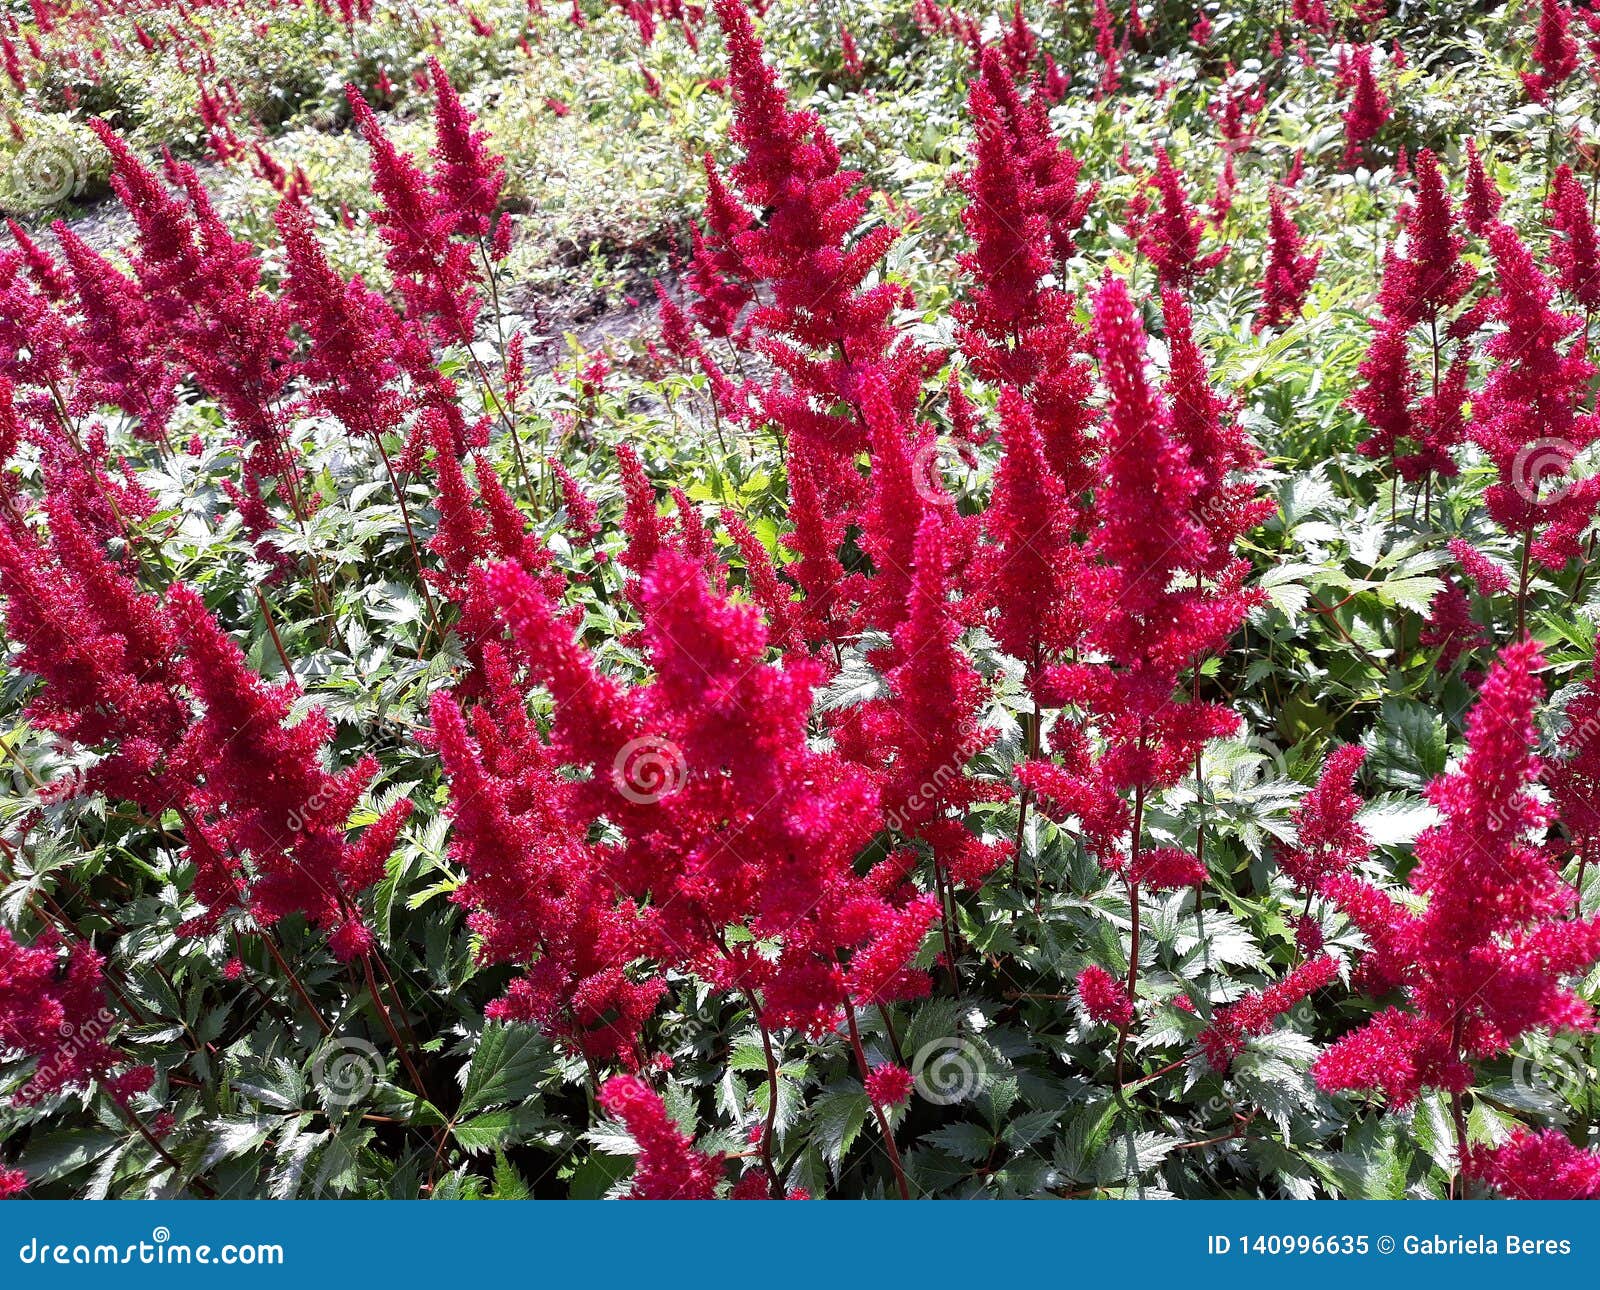 red flowers of astilbe japonica montgomery, false spirea in the garden.